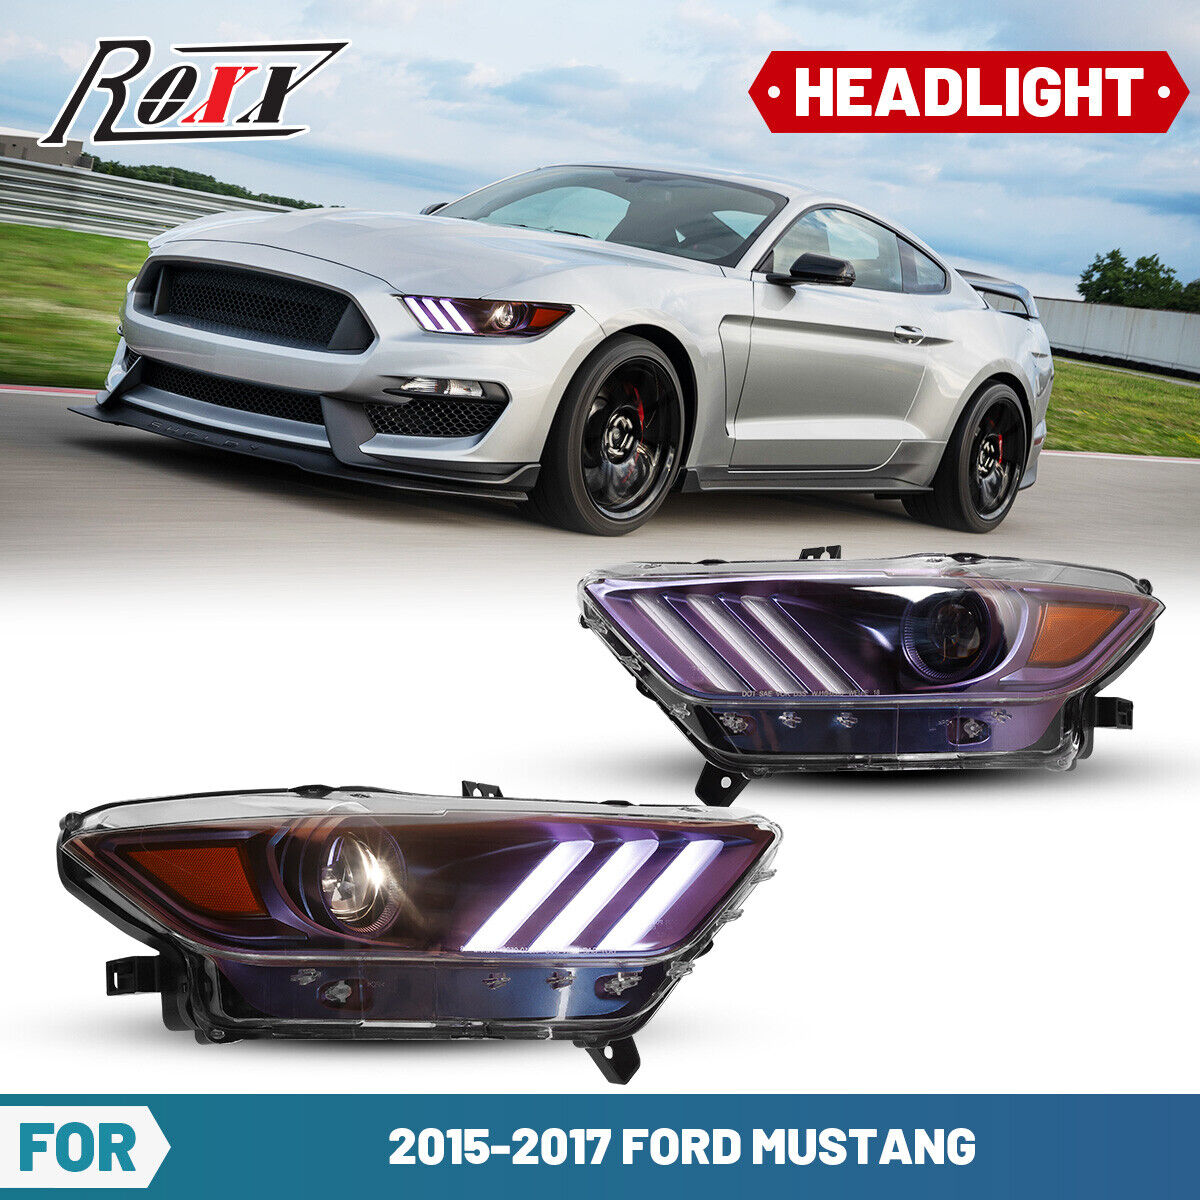 HID/Xenon LED Headlights For Ford 2016-2022 Shelby GT350 Shelby GT500 Headlights